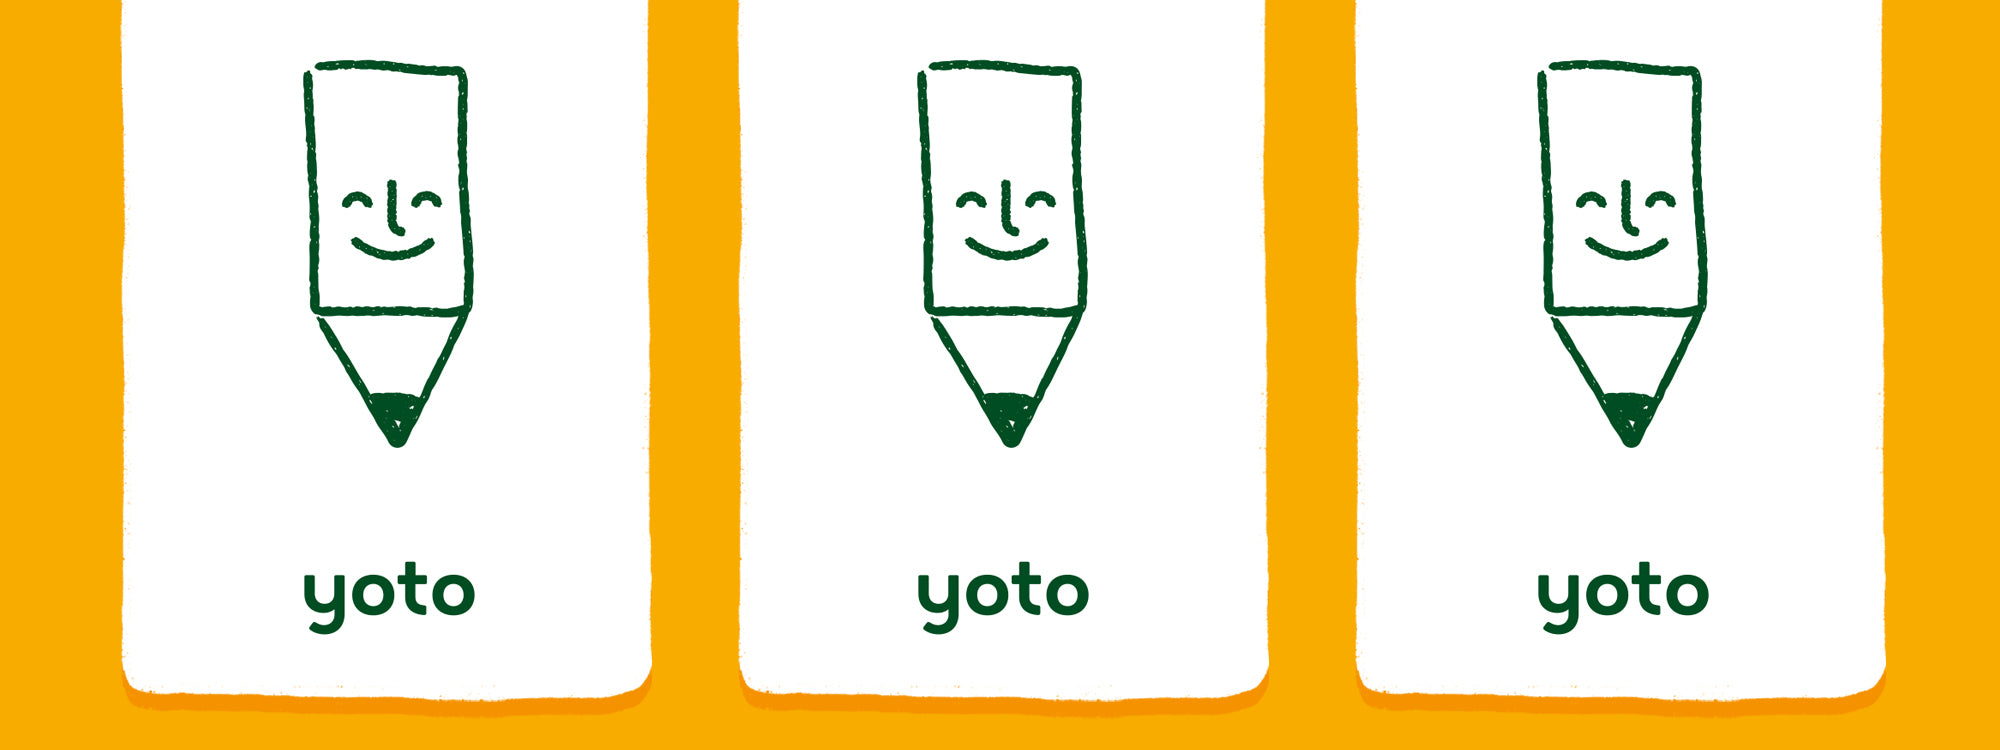 Yoto Make Your Own Cards (Step by Step Instructions) - Real Mum